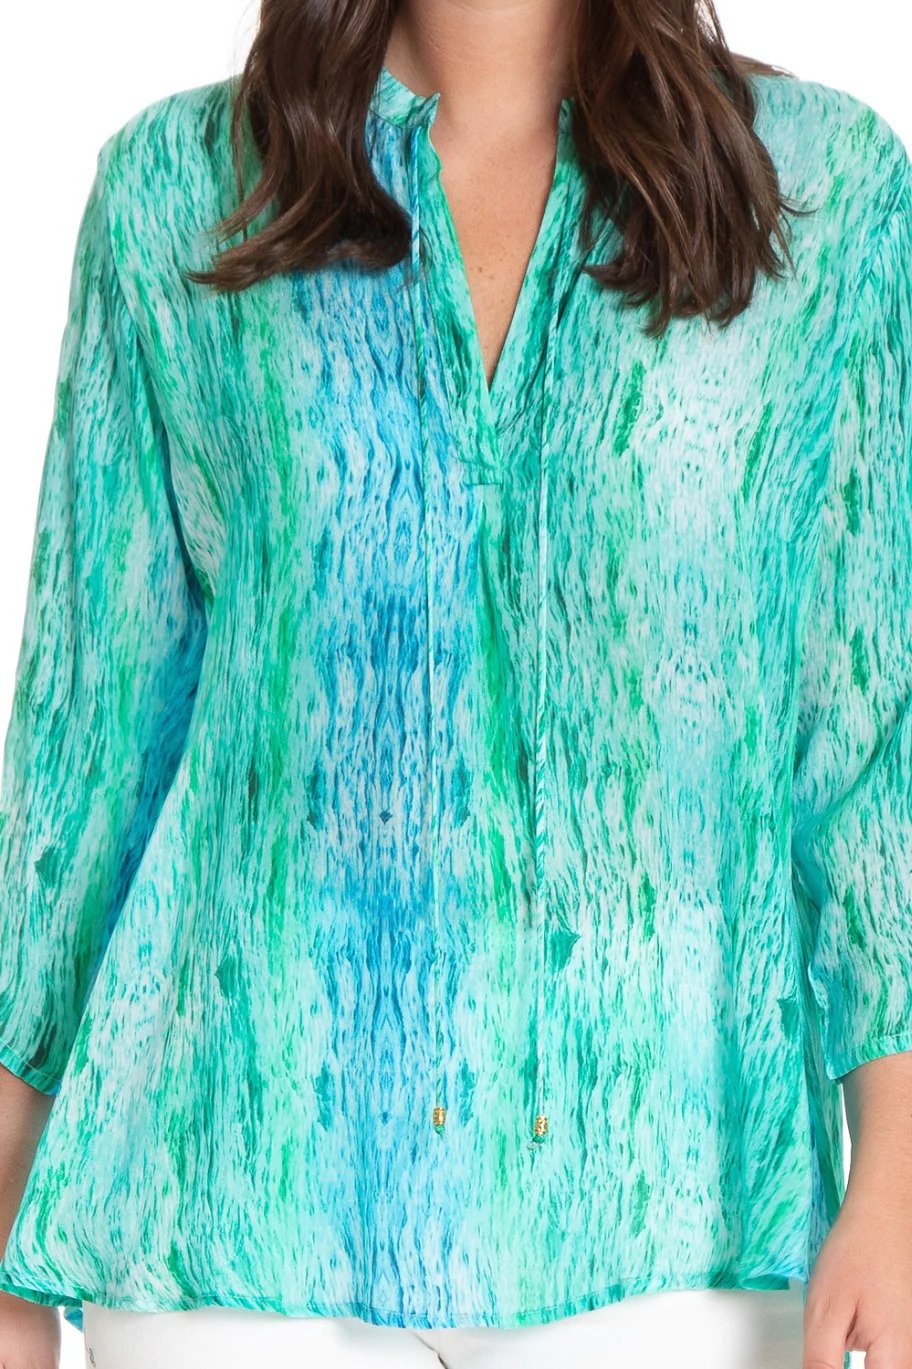 Raindrops and Ripples Print Tunic Neck Detail.